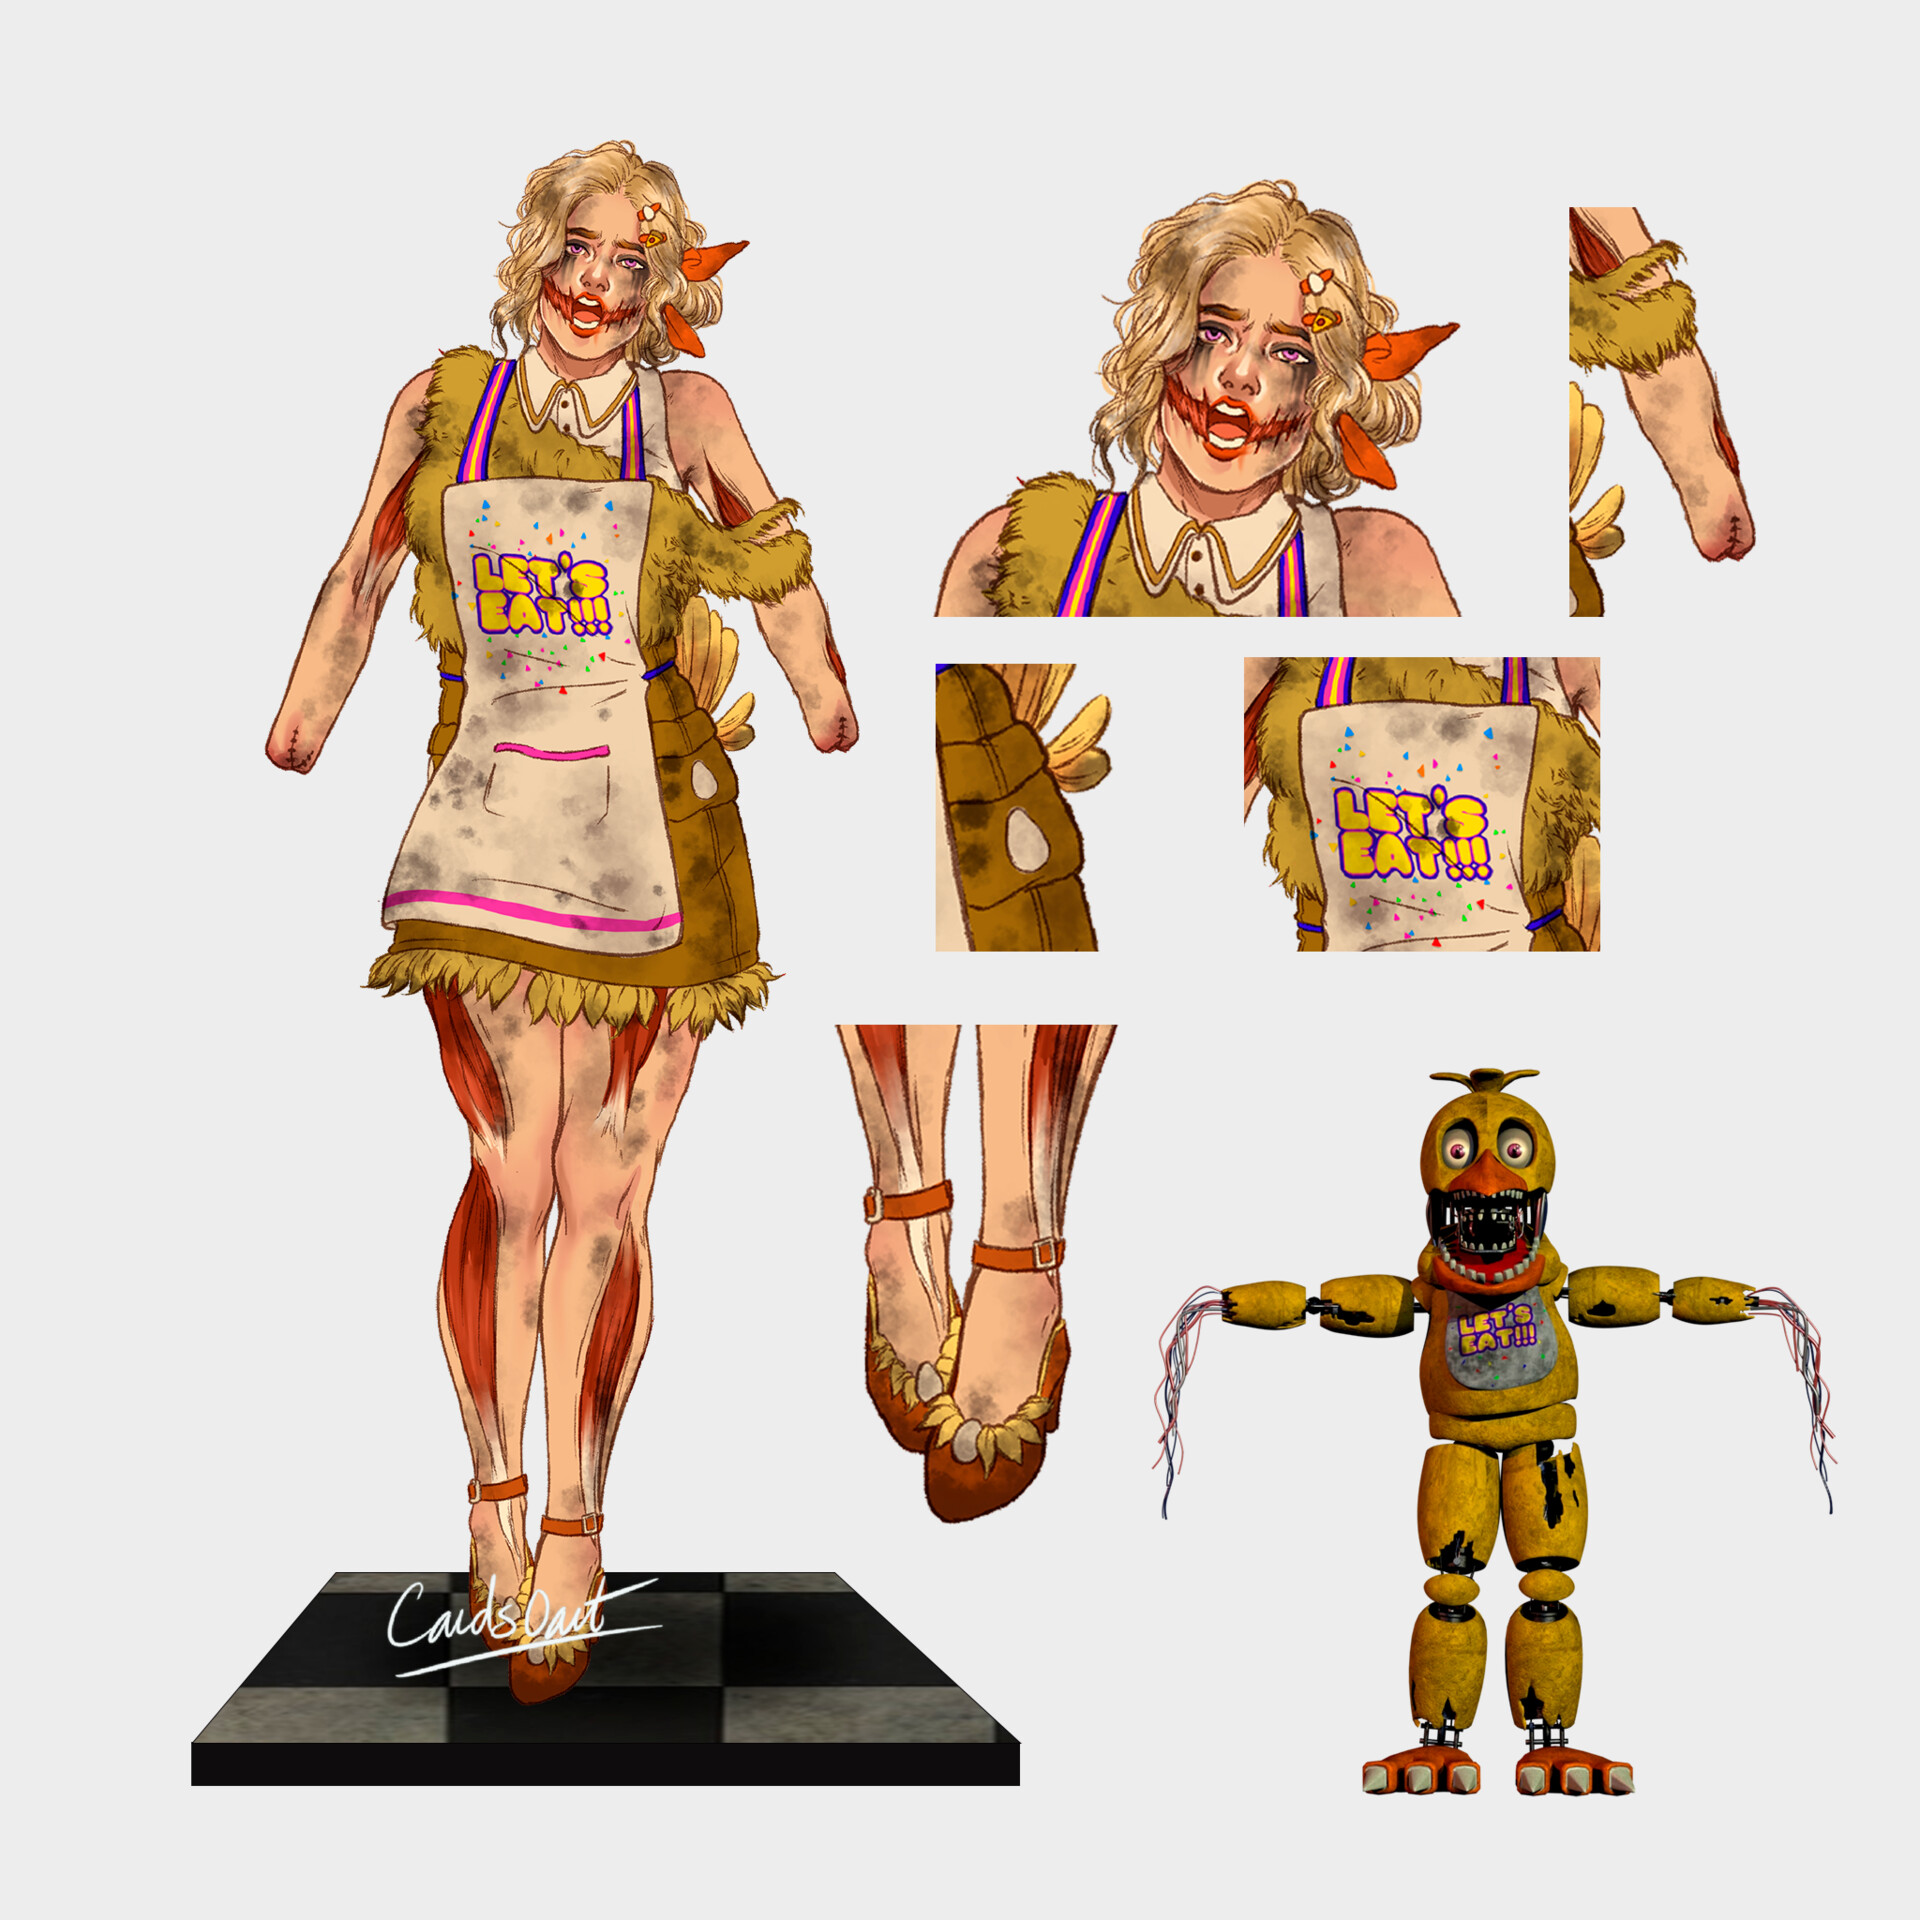 Withered withered chica by whfww on DeviantArt, withered chica